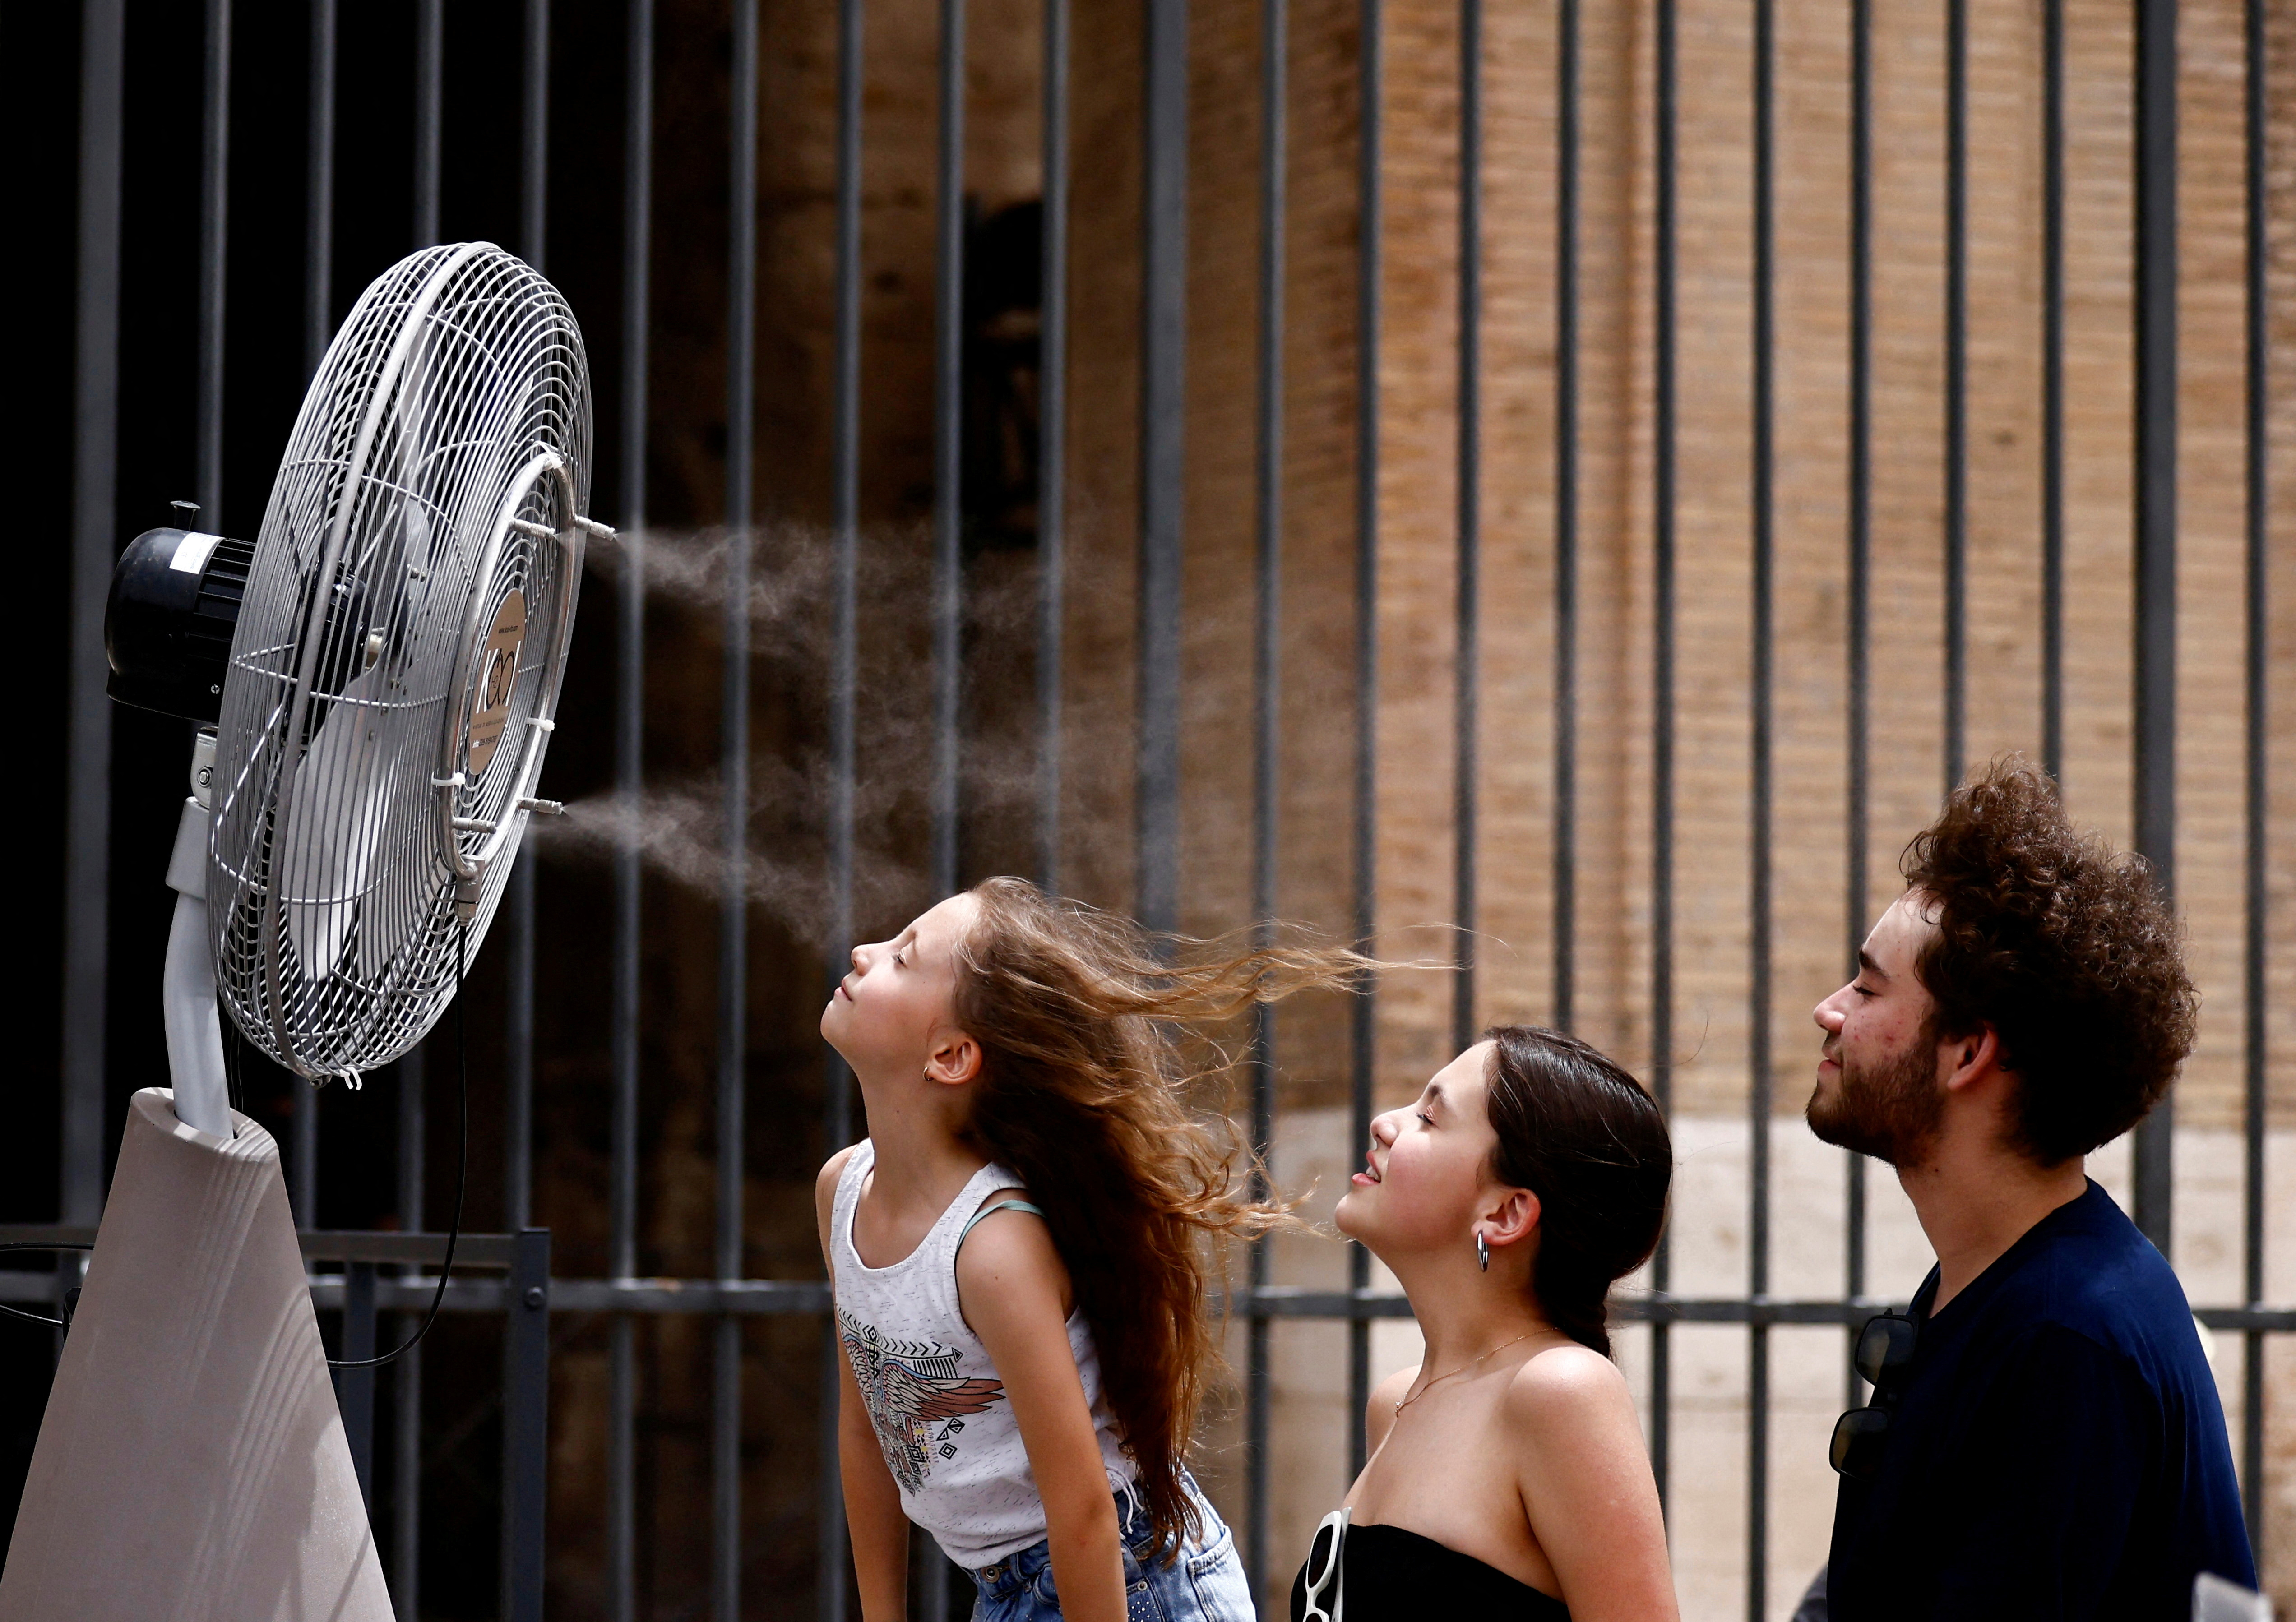 People stand in front of a cooler installed around the Colosseum amid a heatwave in Rome